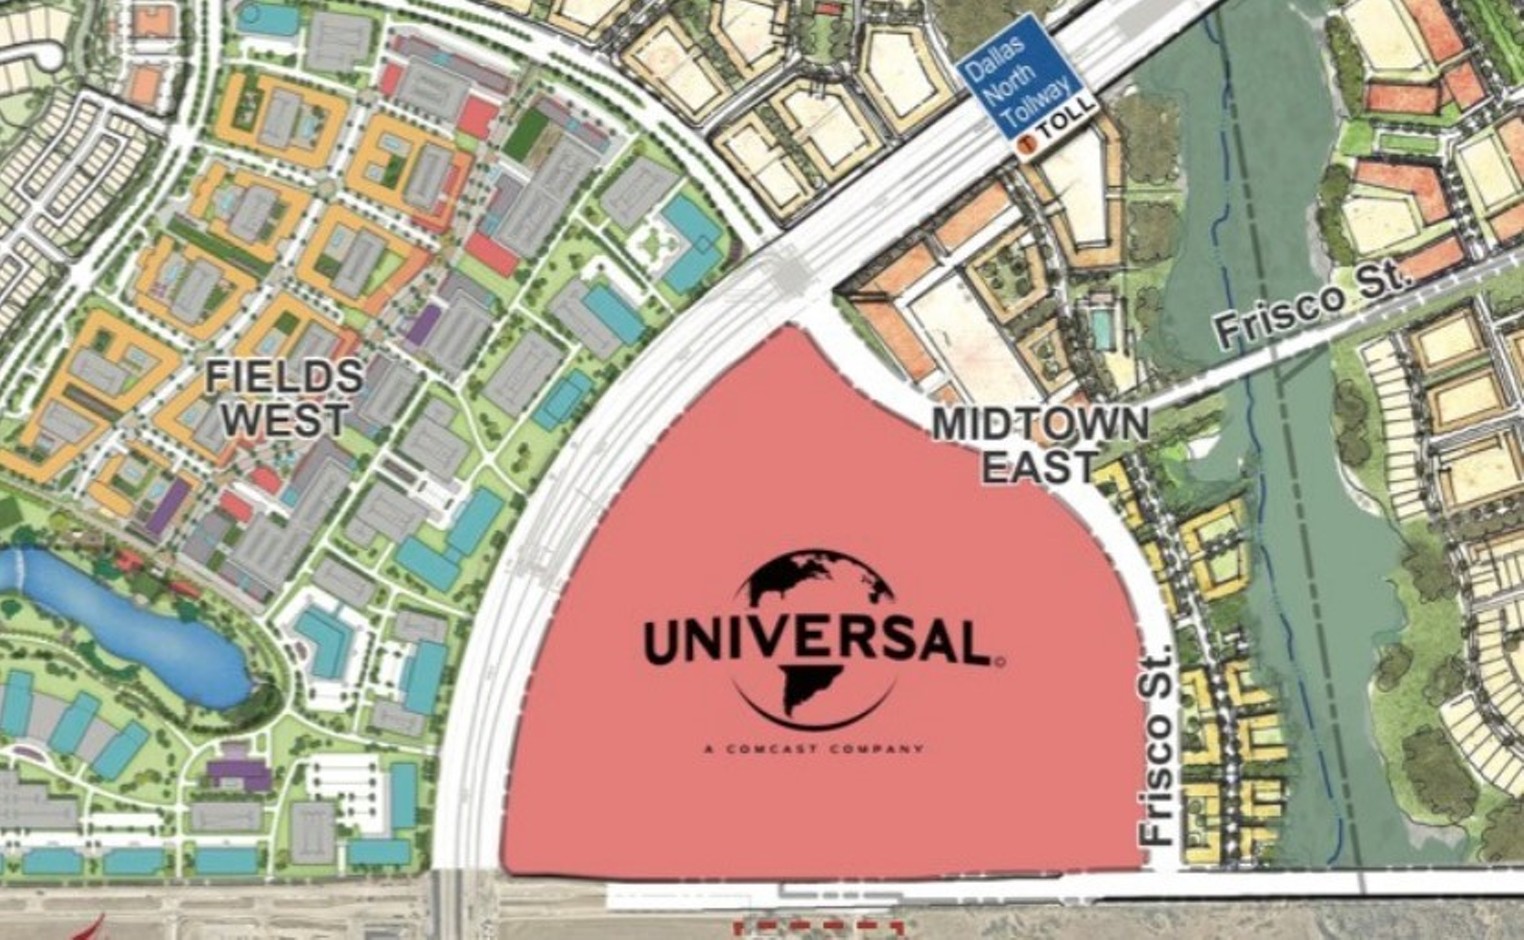 We Have New Details on Frisco's Universal Park, And No, It Has More Than One Toll Road Entrance